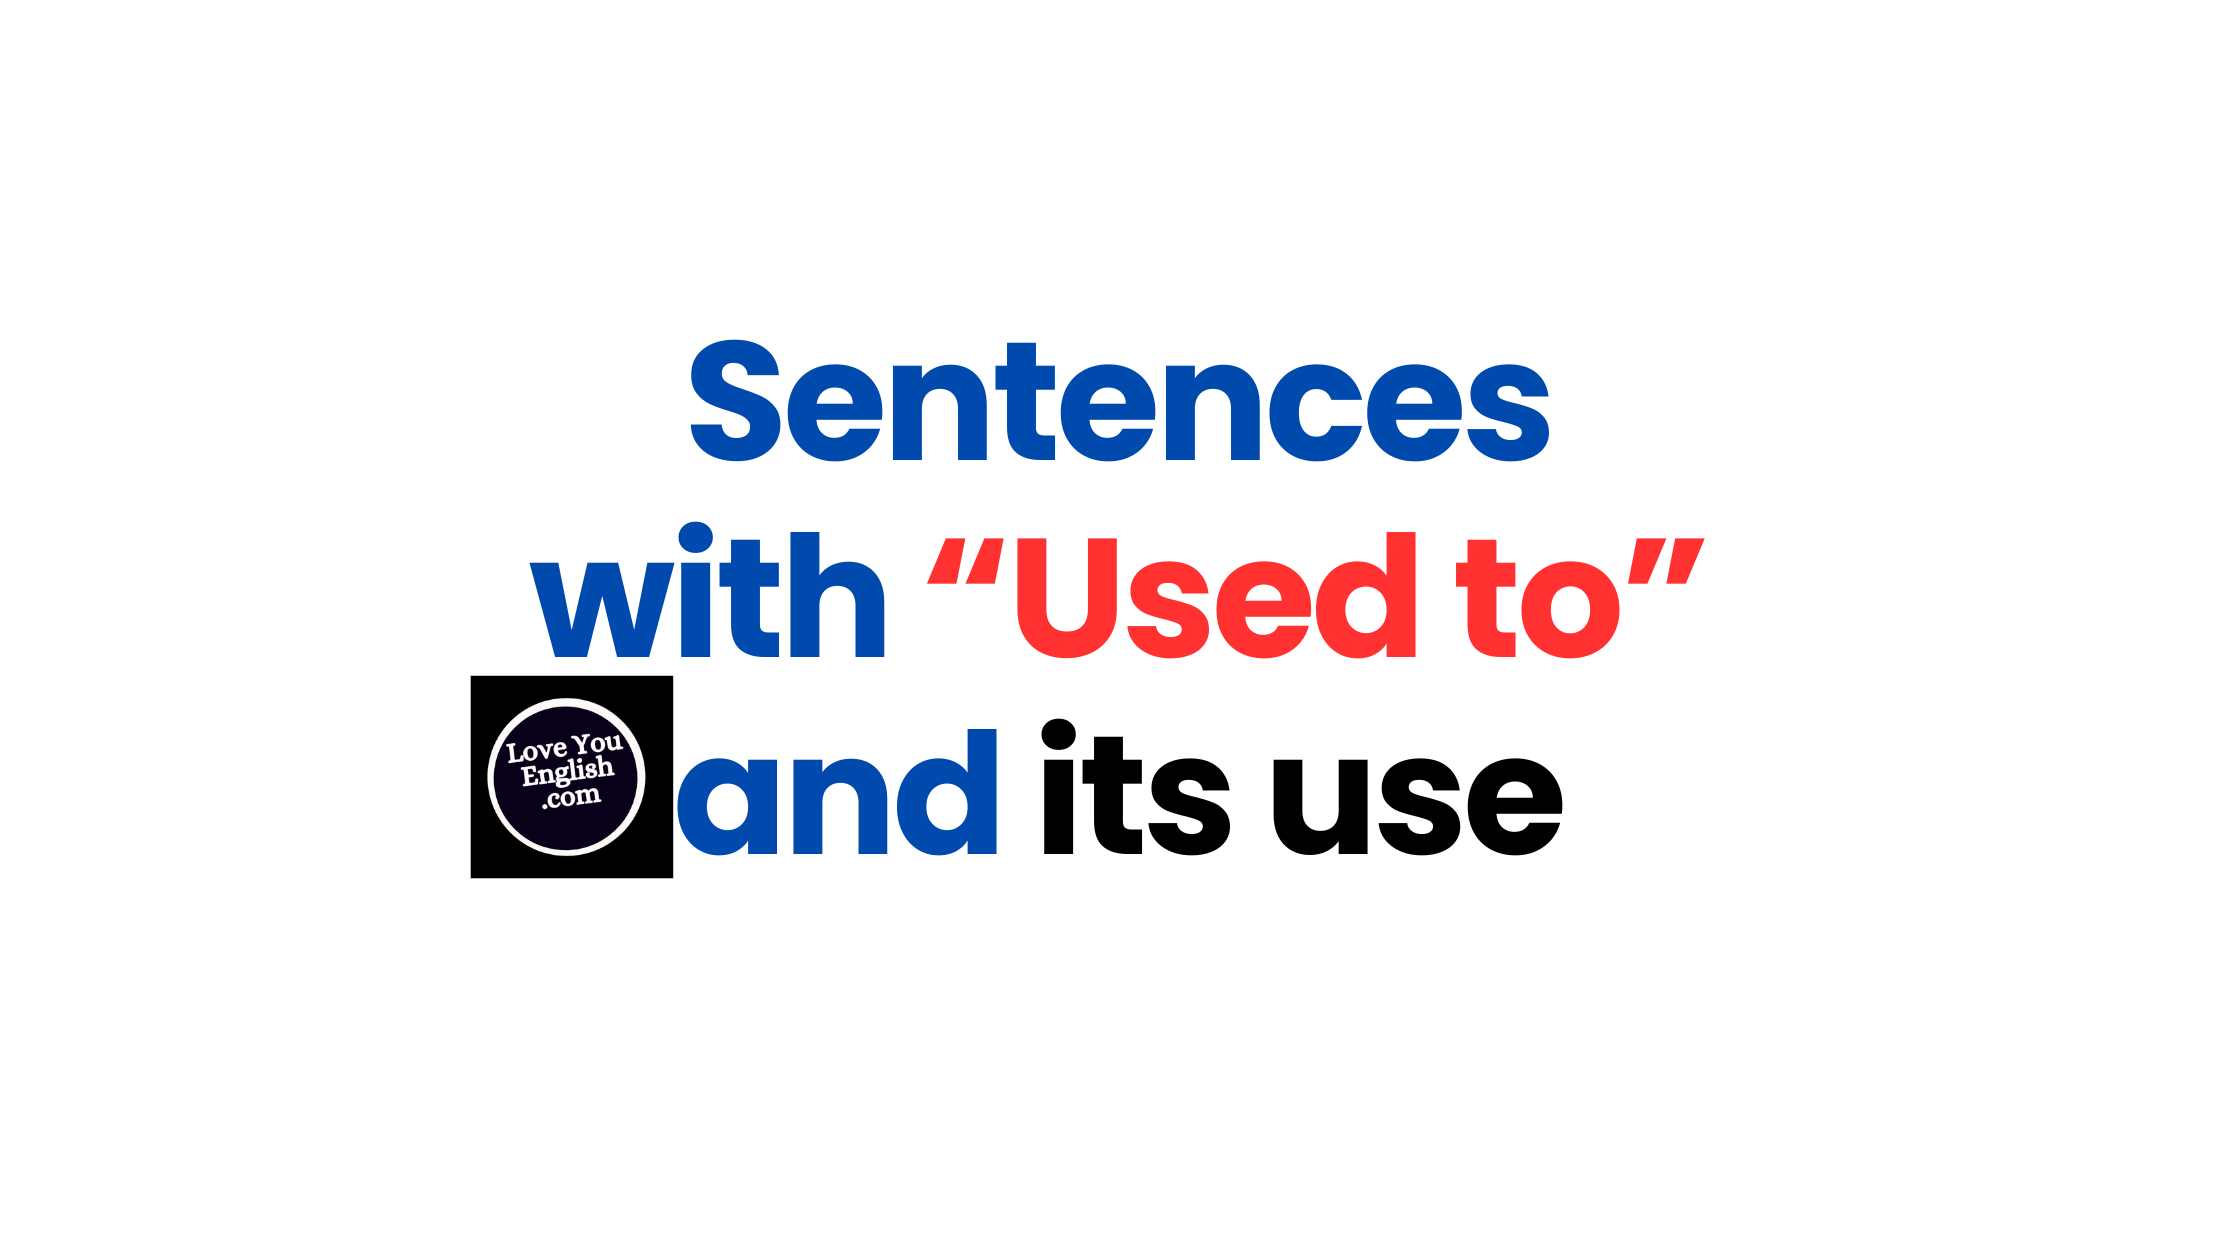 Sentences with “Used to” and its use